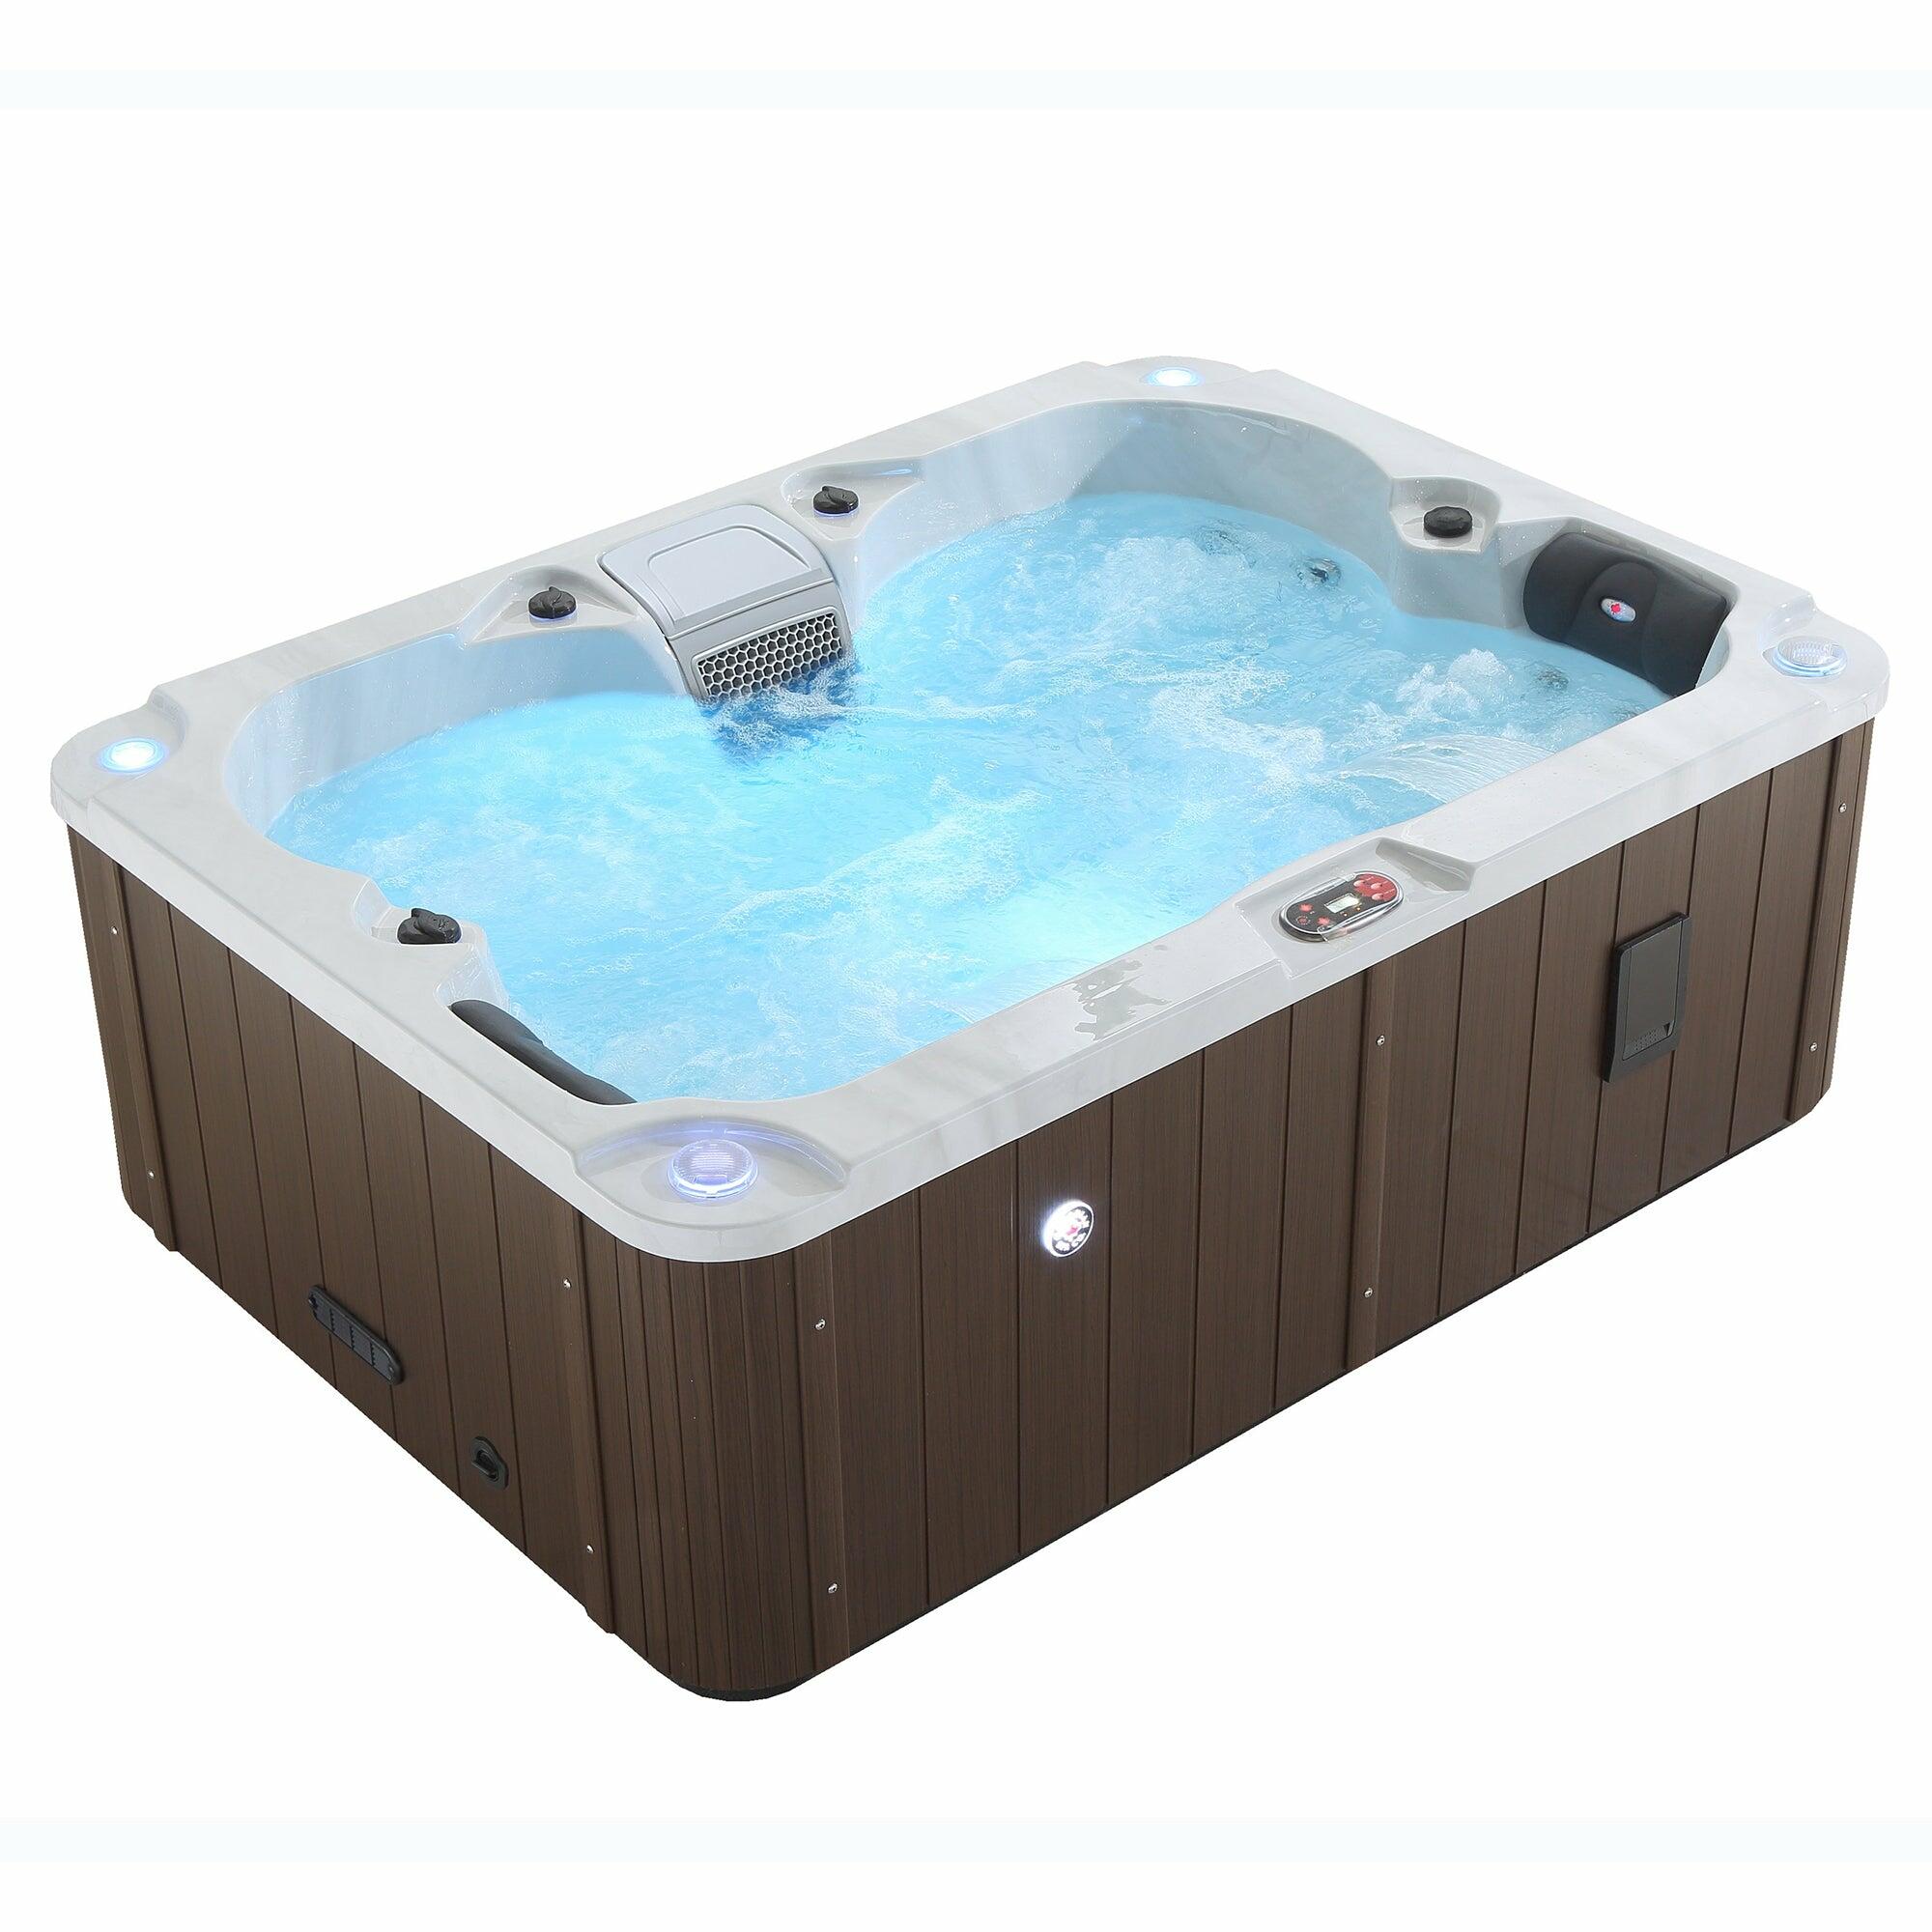 An image of Canadian Spa Kelowna 21 Jet 4 Person Hot Tub